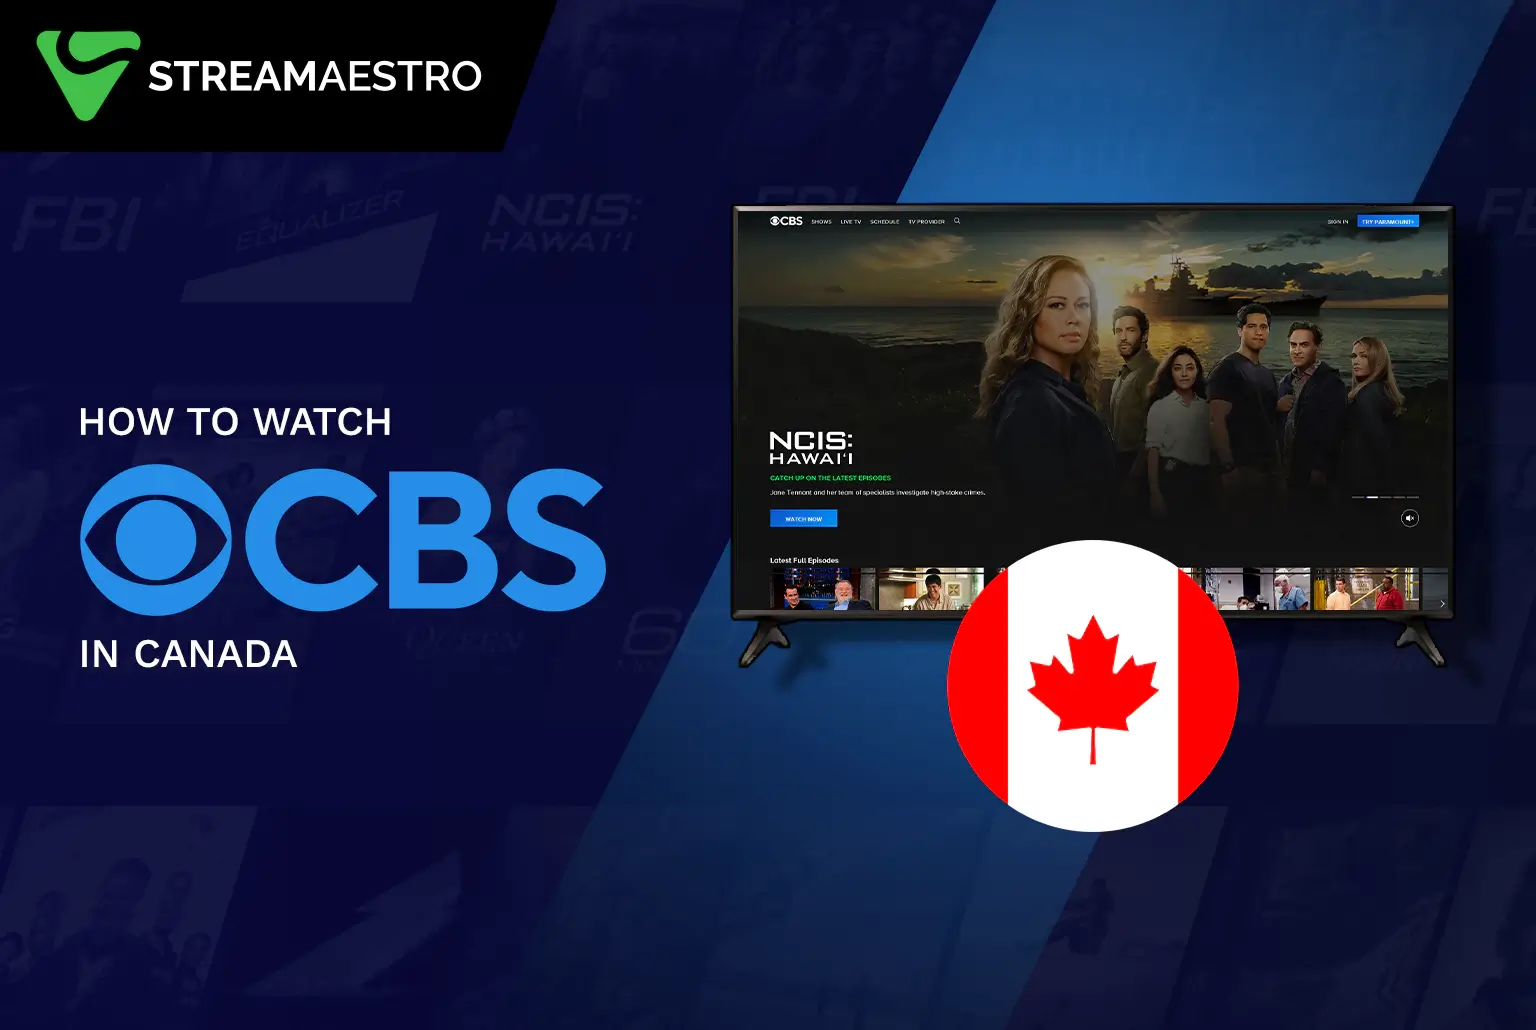 Watch CBS All Access in Canada